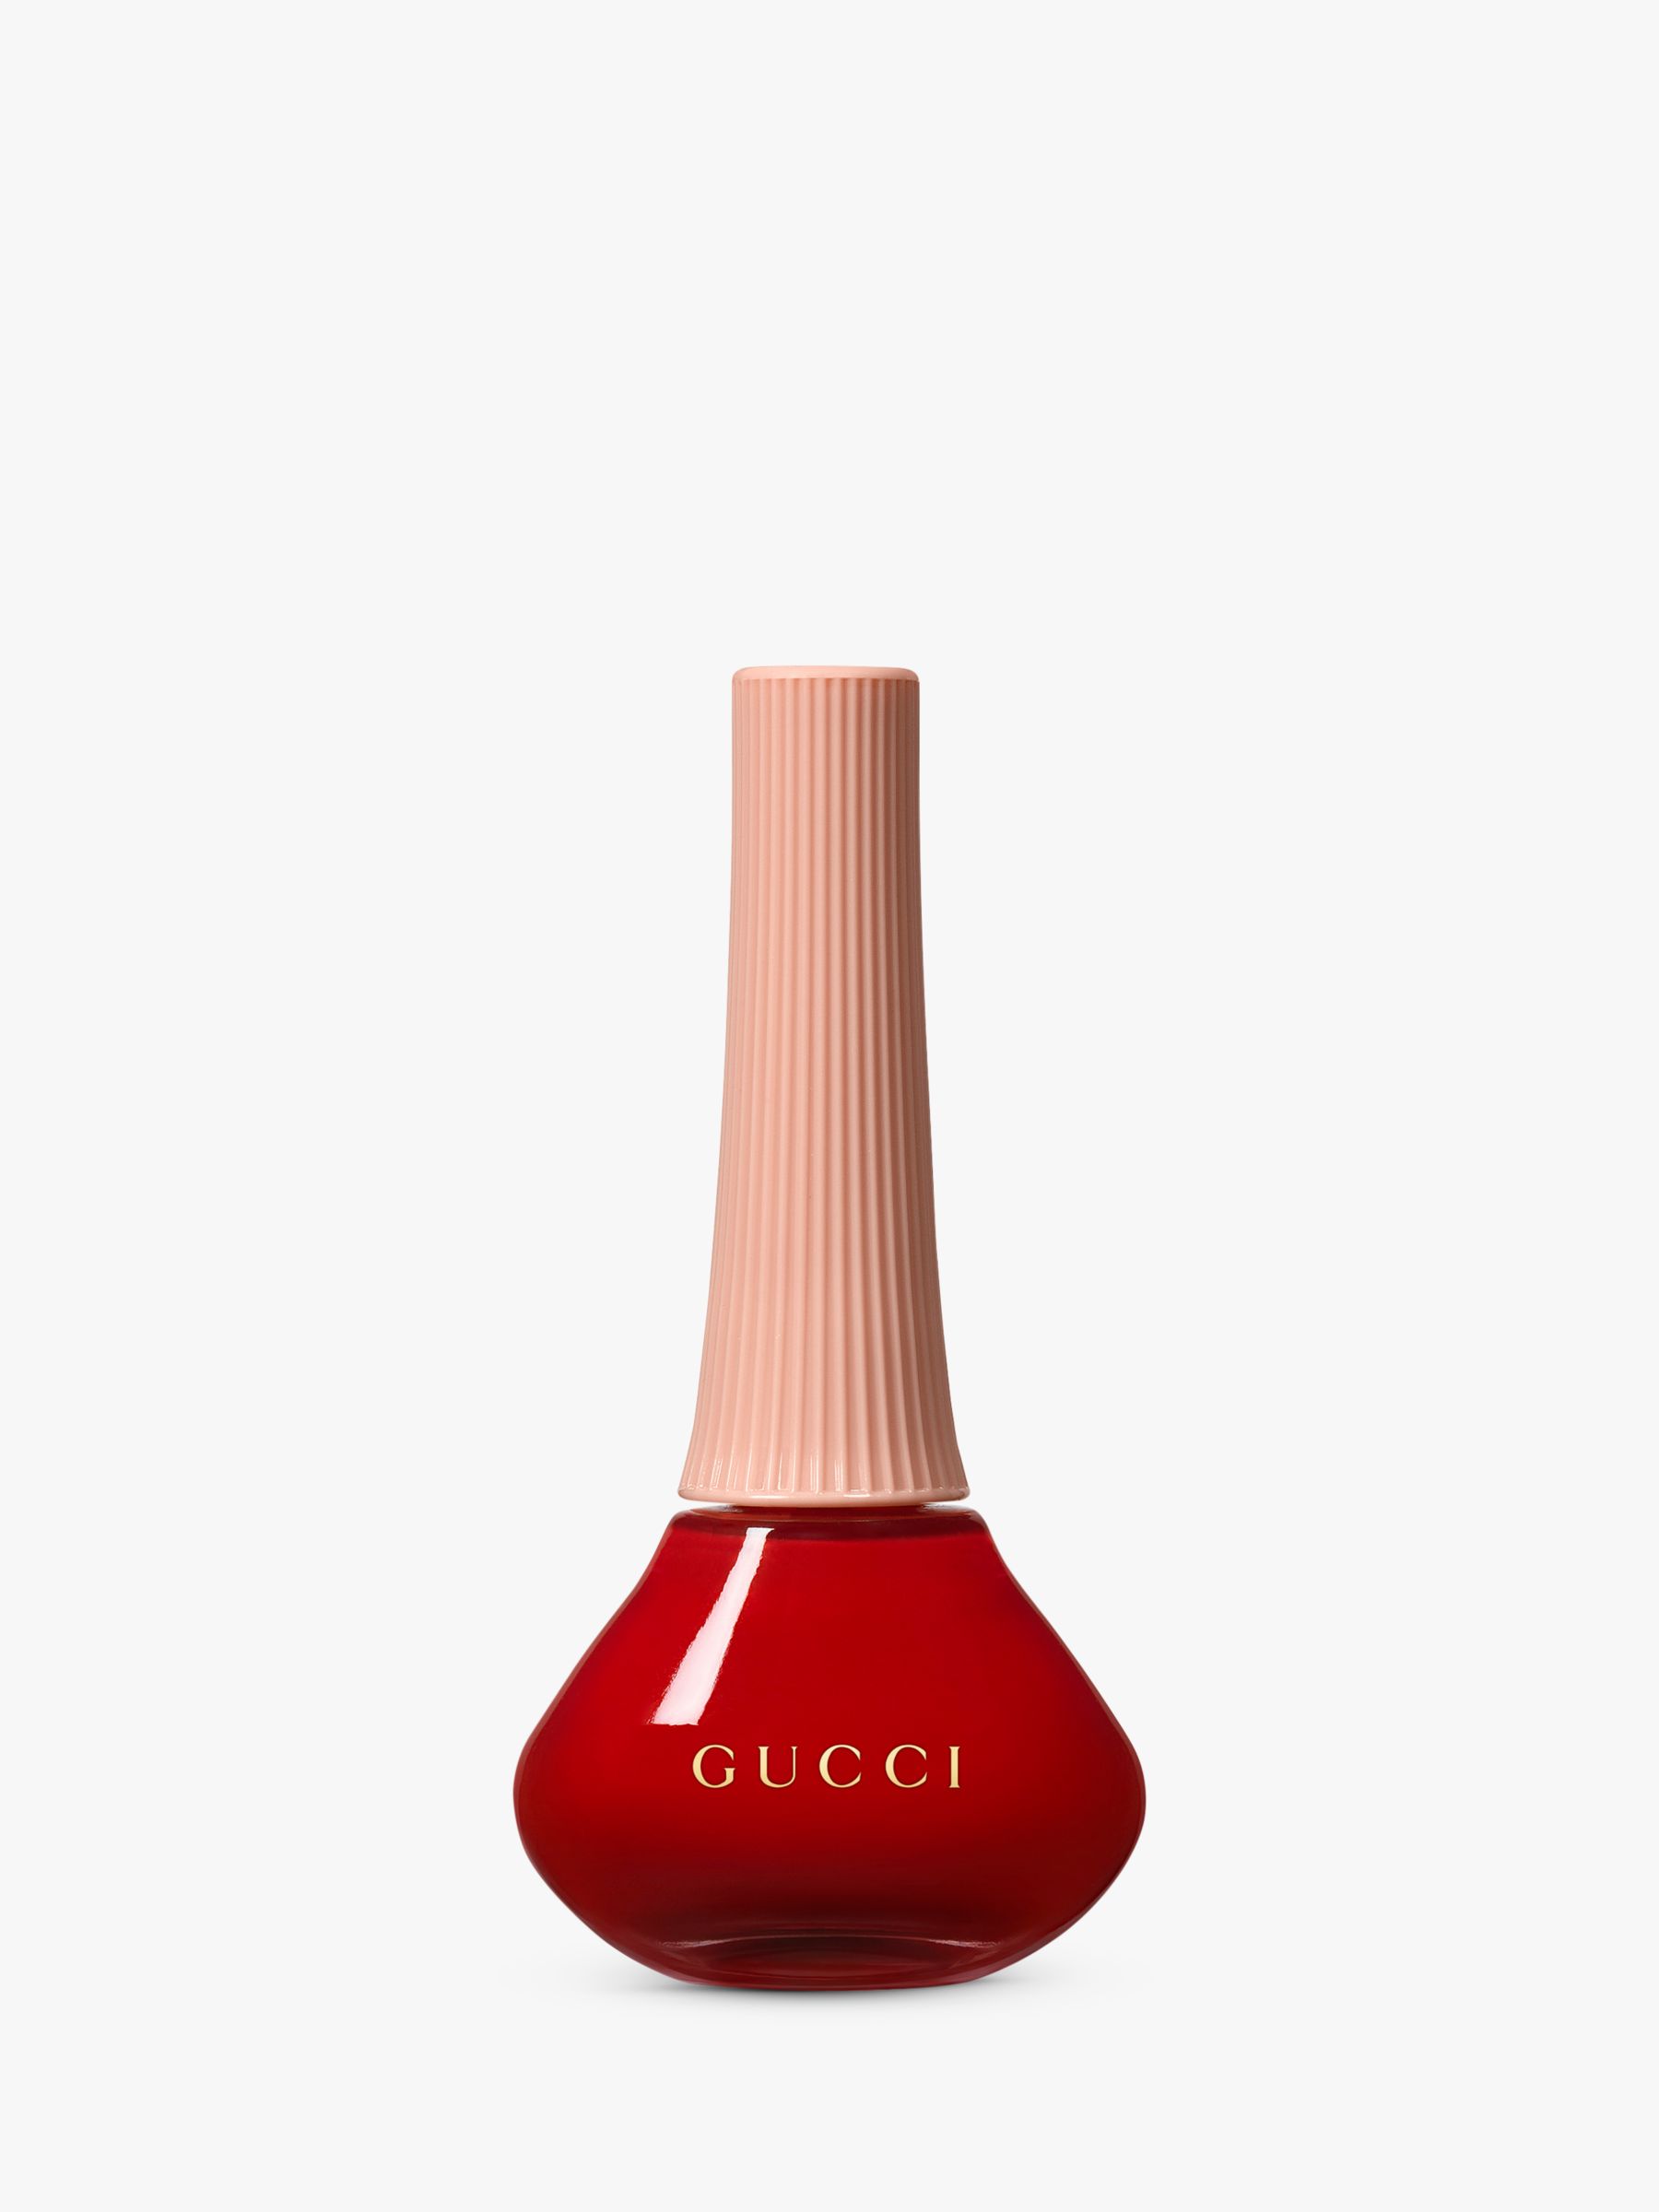 Gucci Vernis À Ongles Nail Polish, 025* Goldie Red